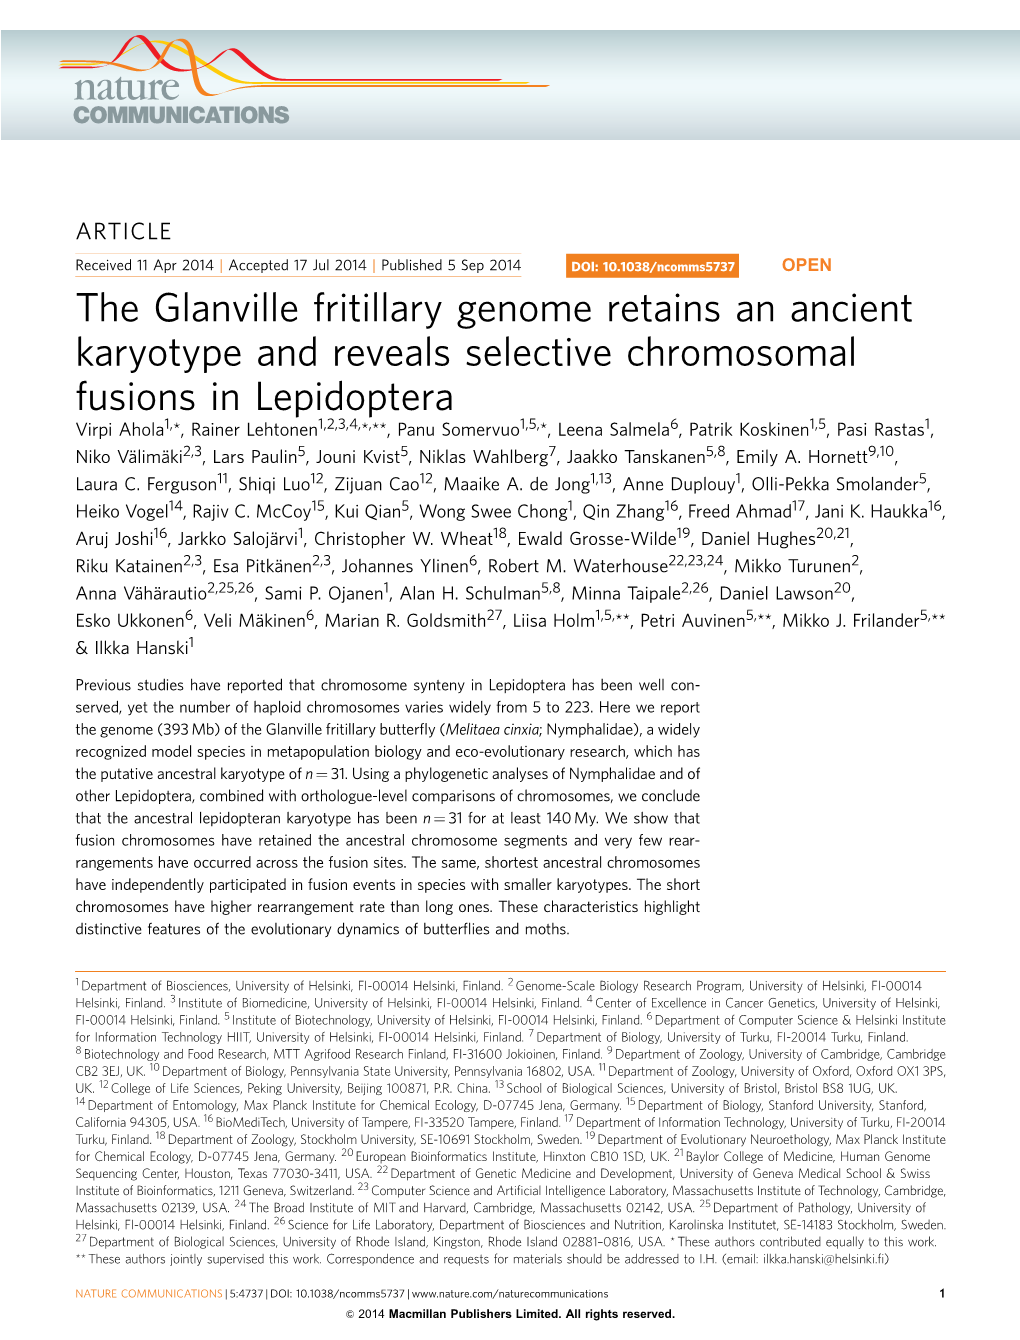 The Glanville Fritillary Genome Retains an Ancient Karyotype and Reveals